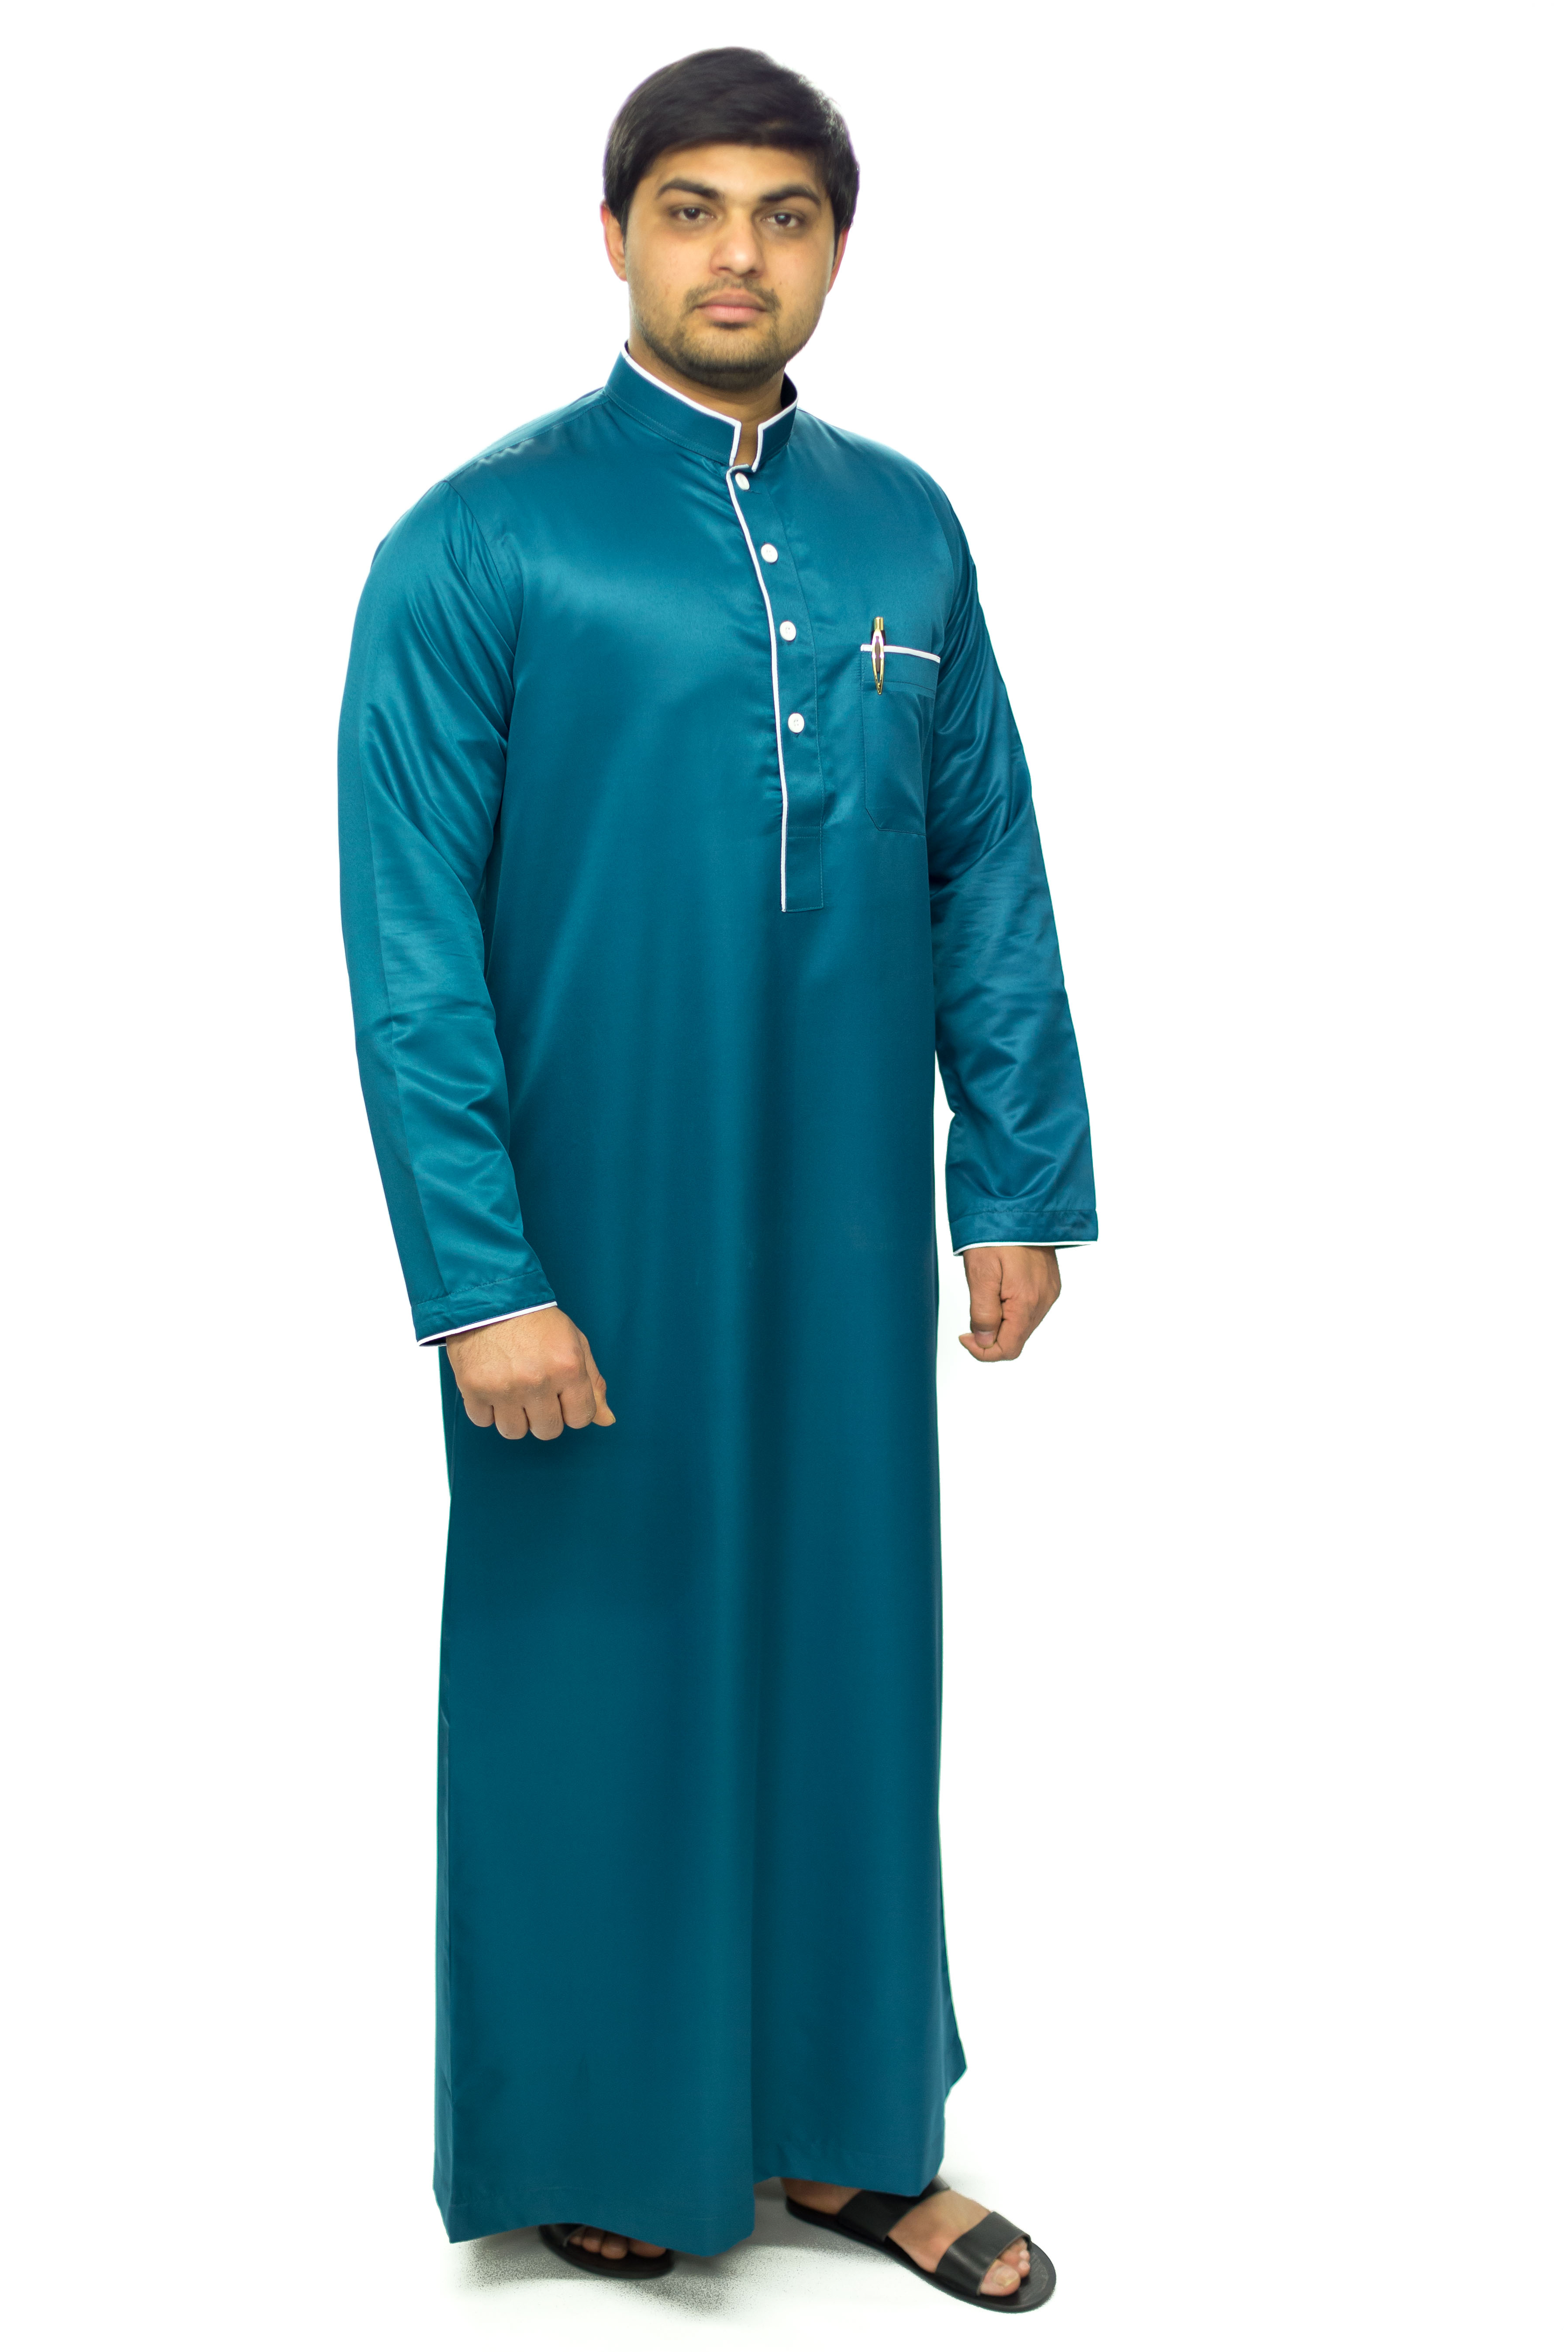 Aegean Blue New Mens pipping Jubba